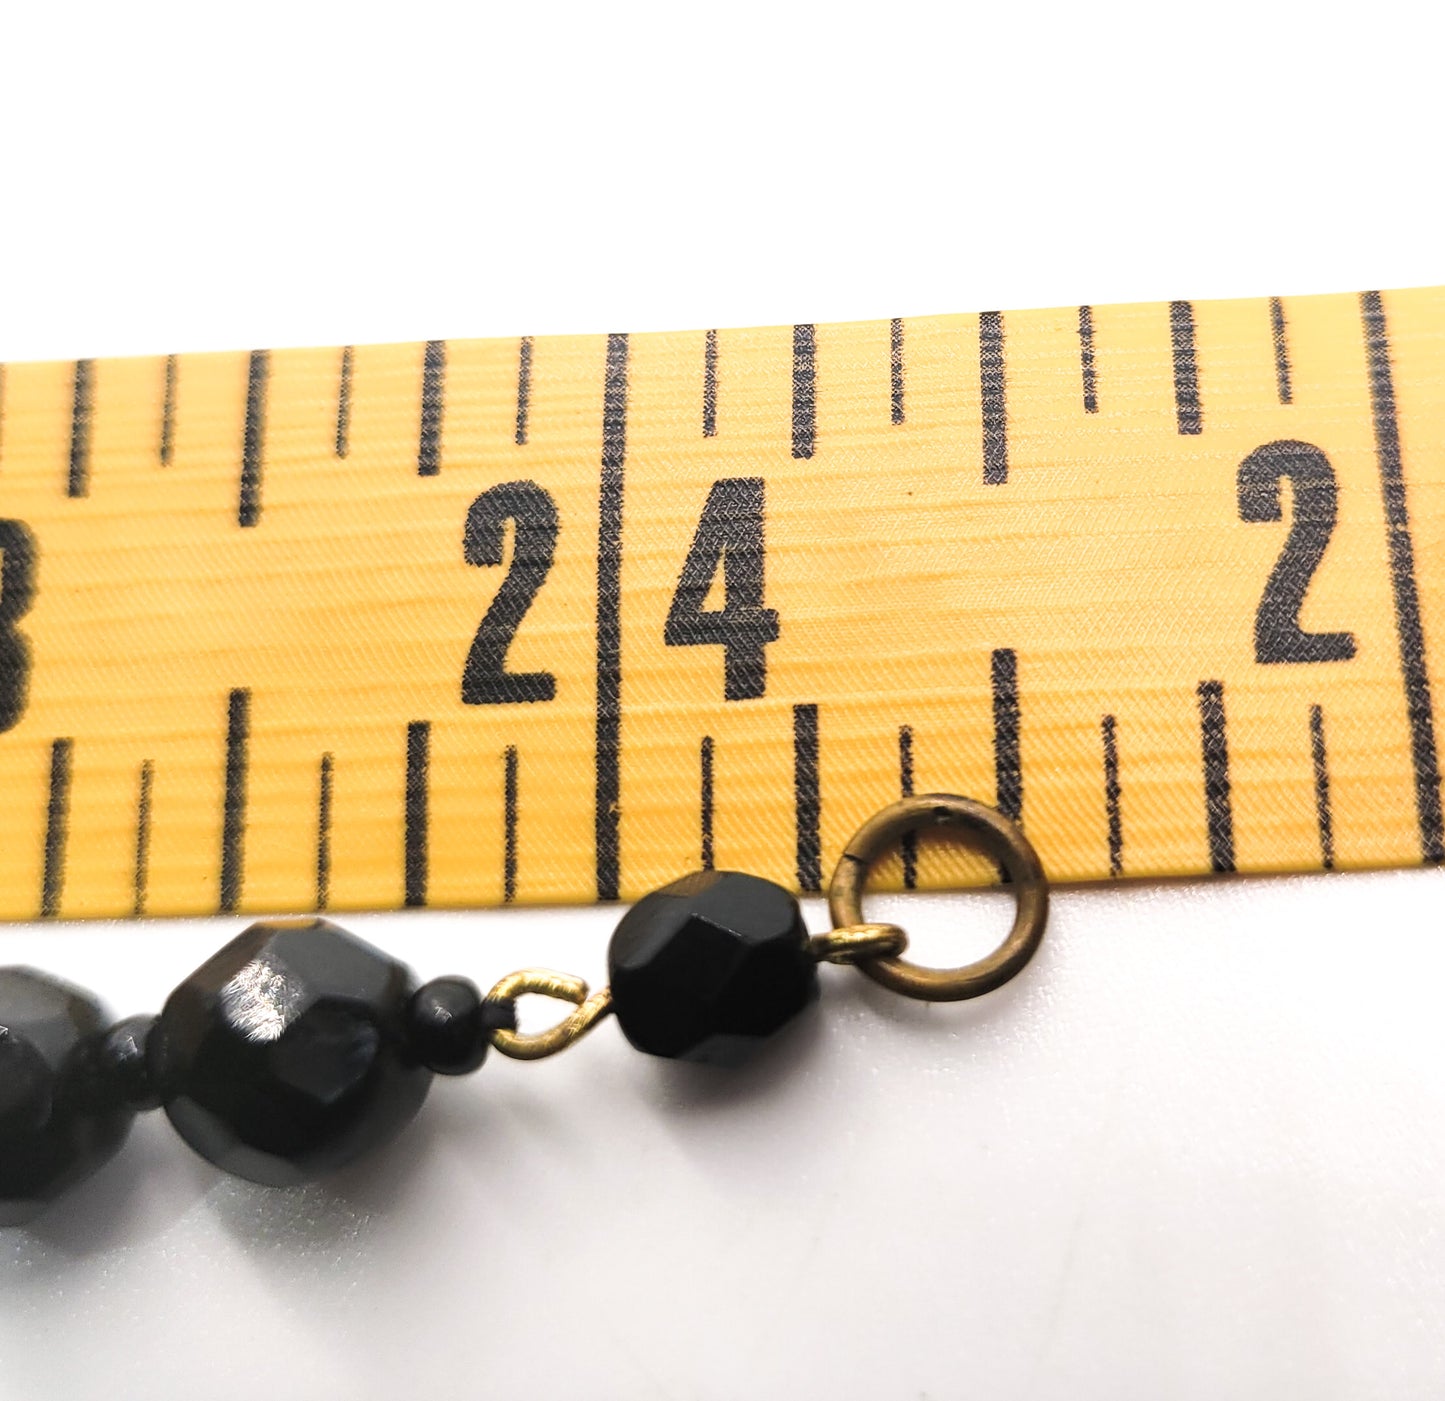 Vintage Faceted Long molded glass Black beaded silk strung necklace